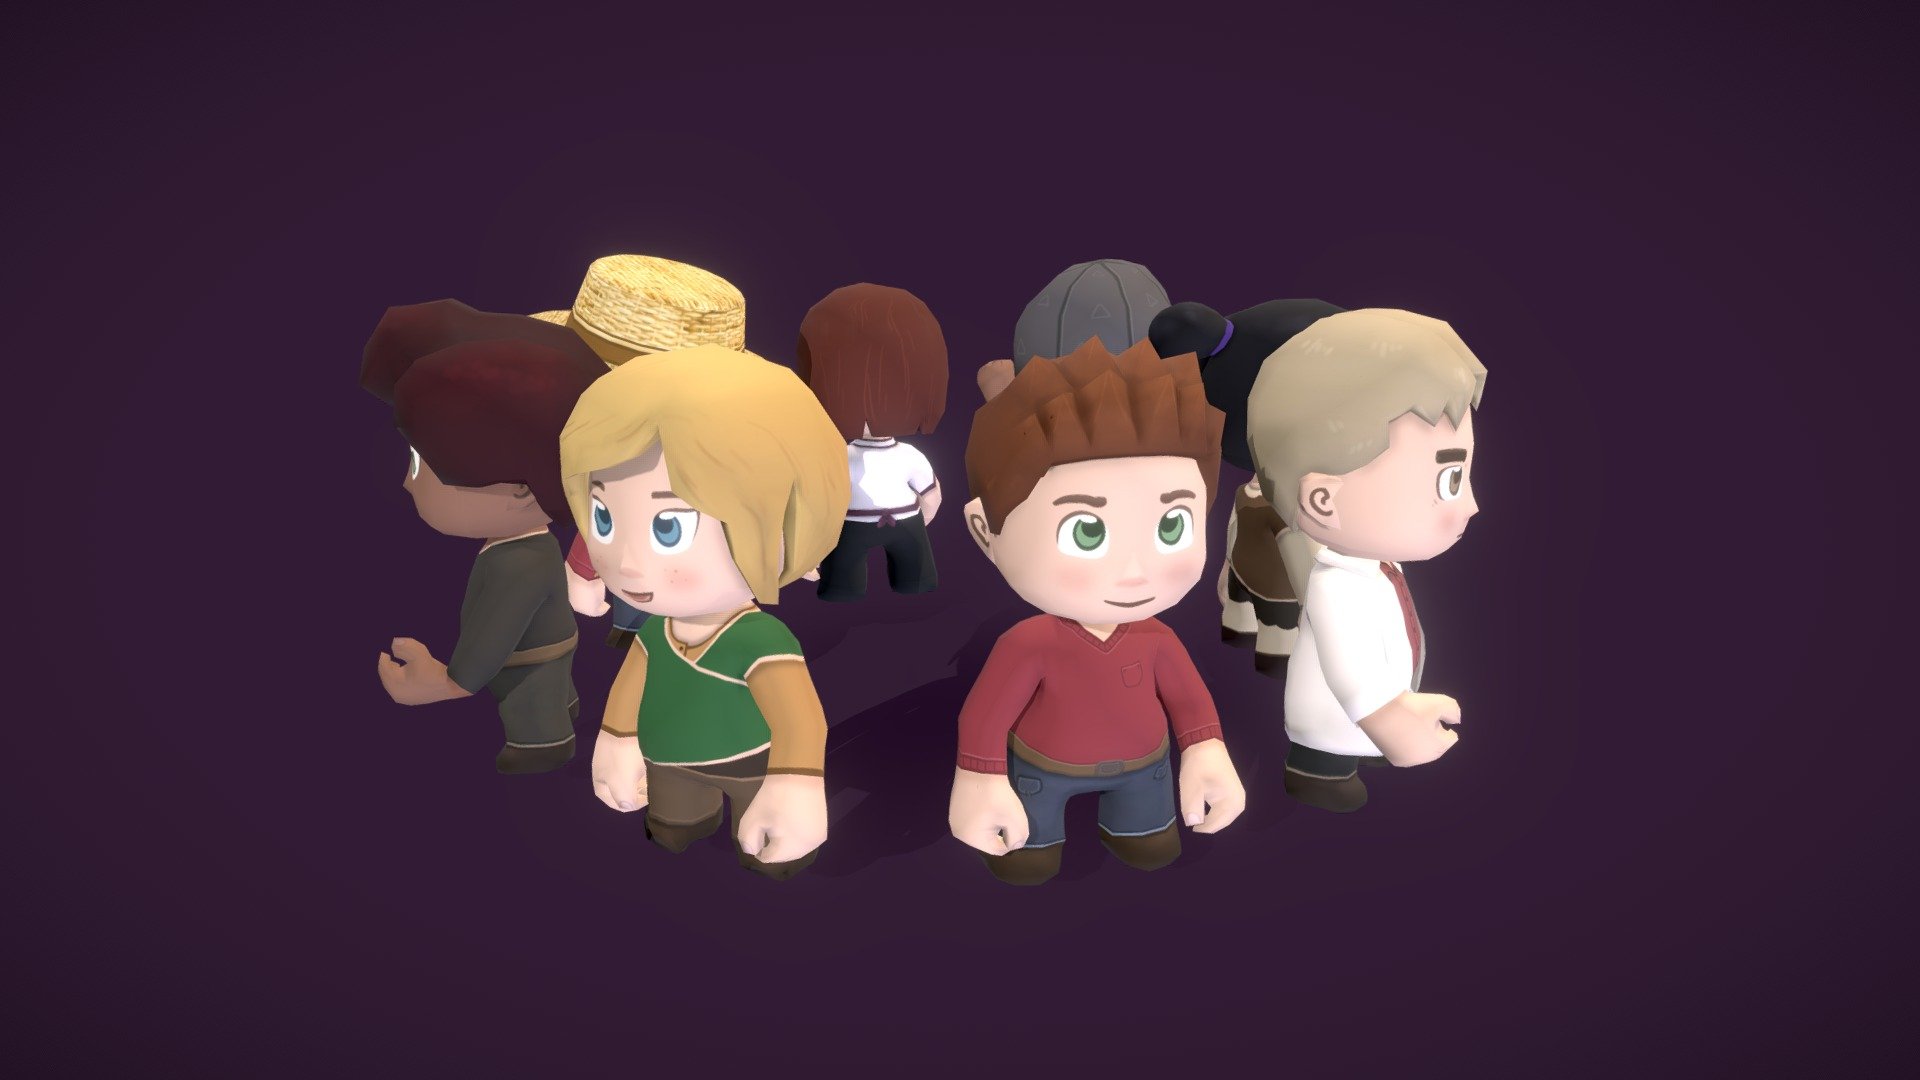 Super stylized characters for a mobile game 3d model